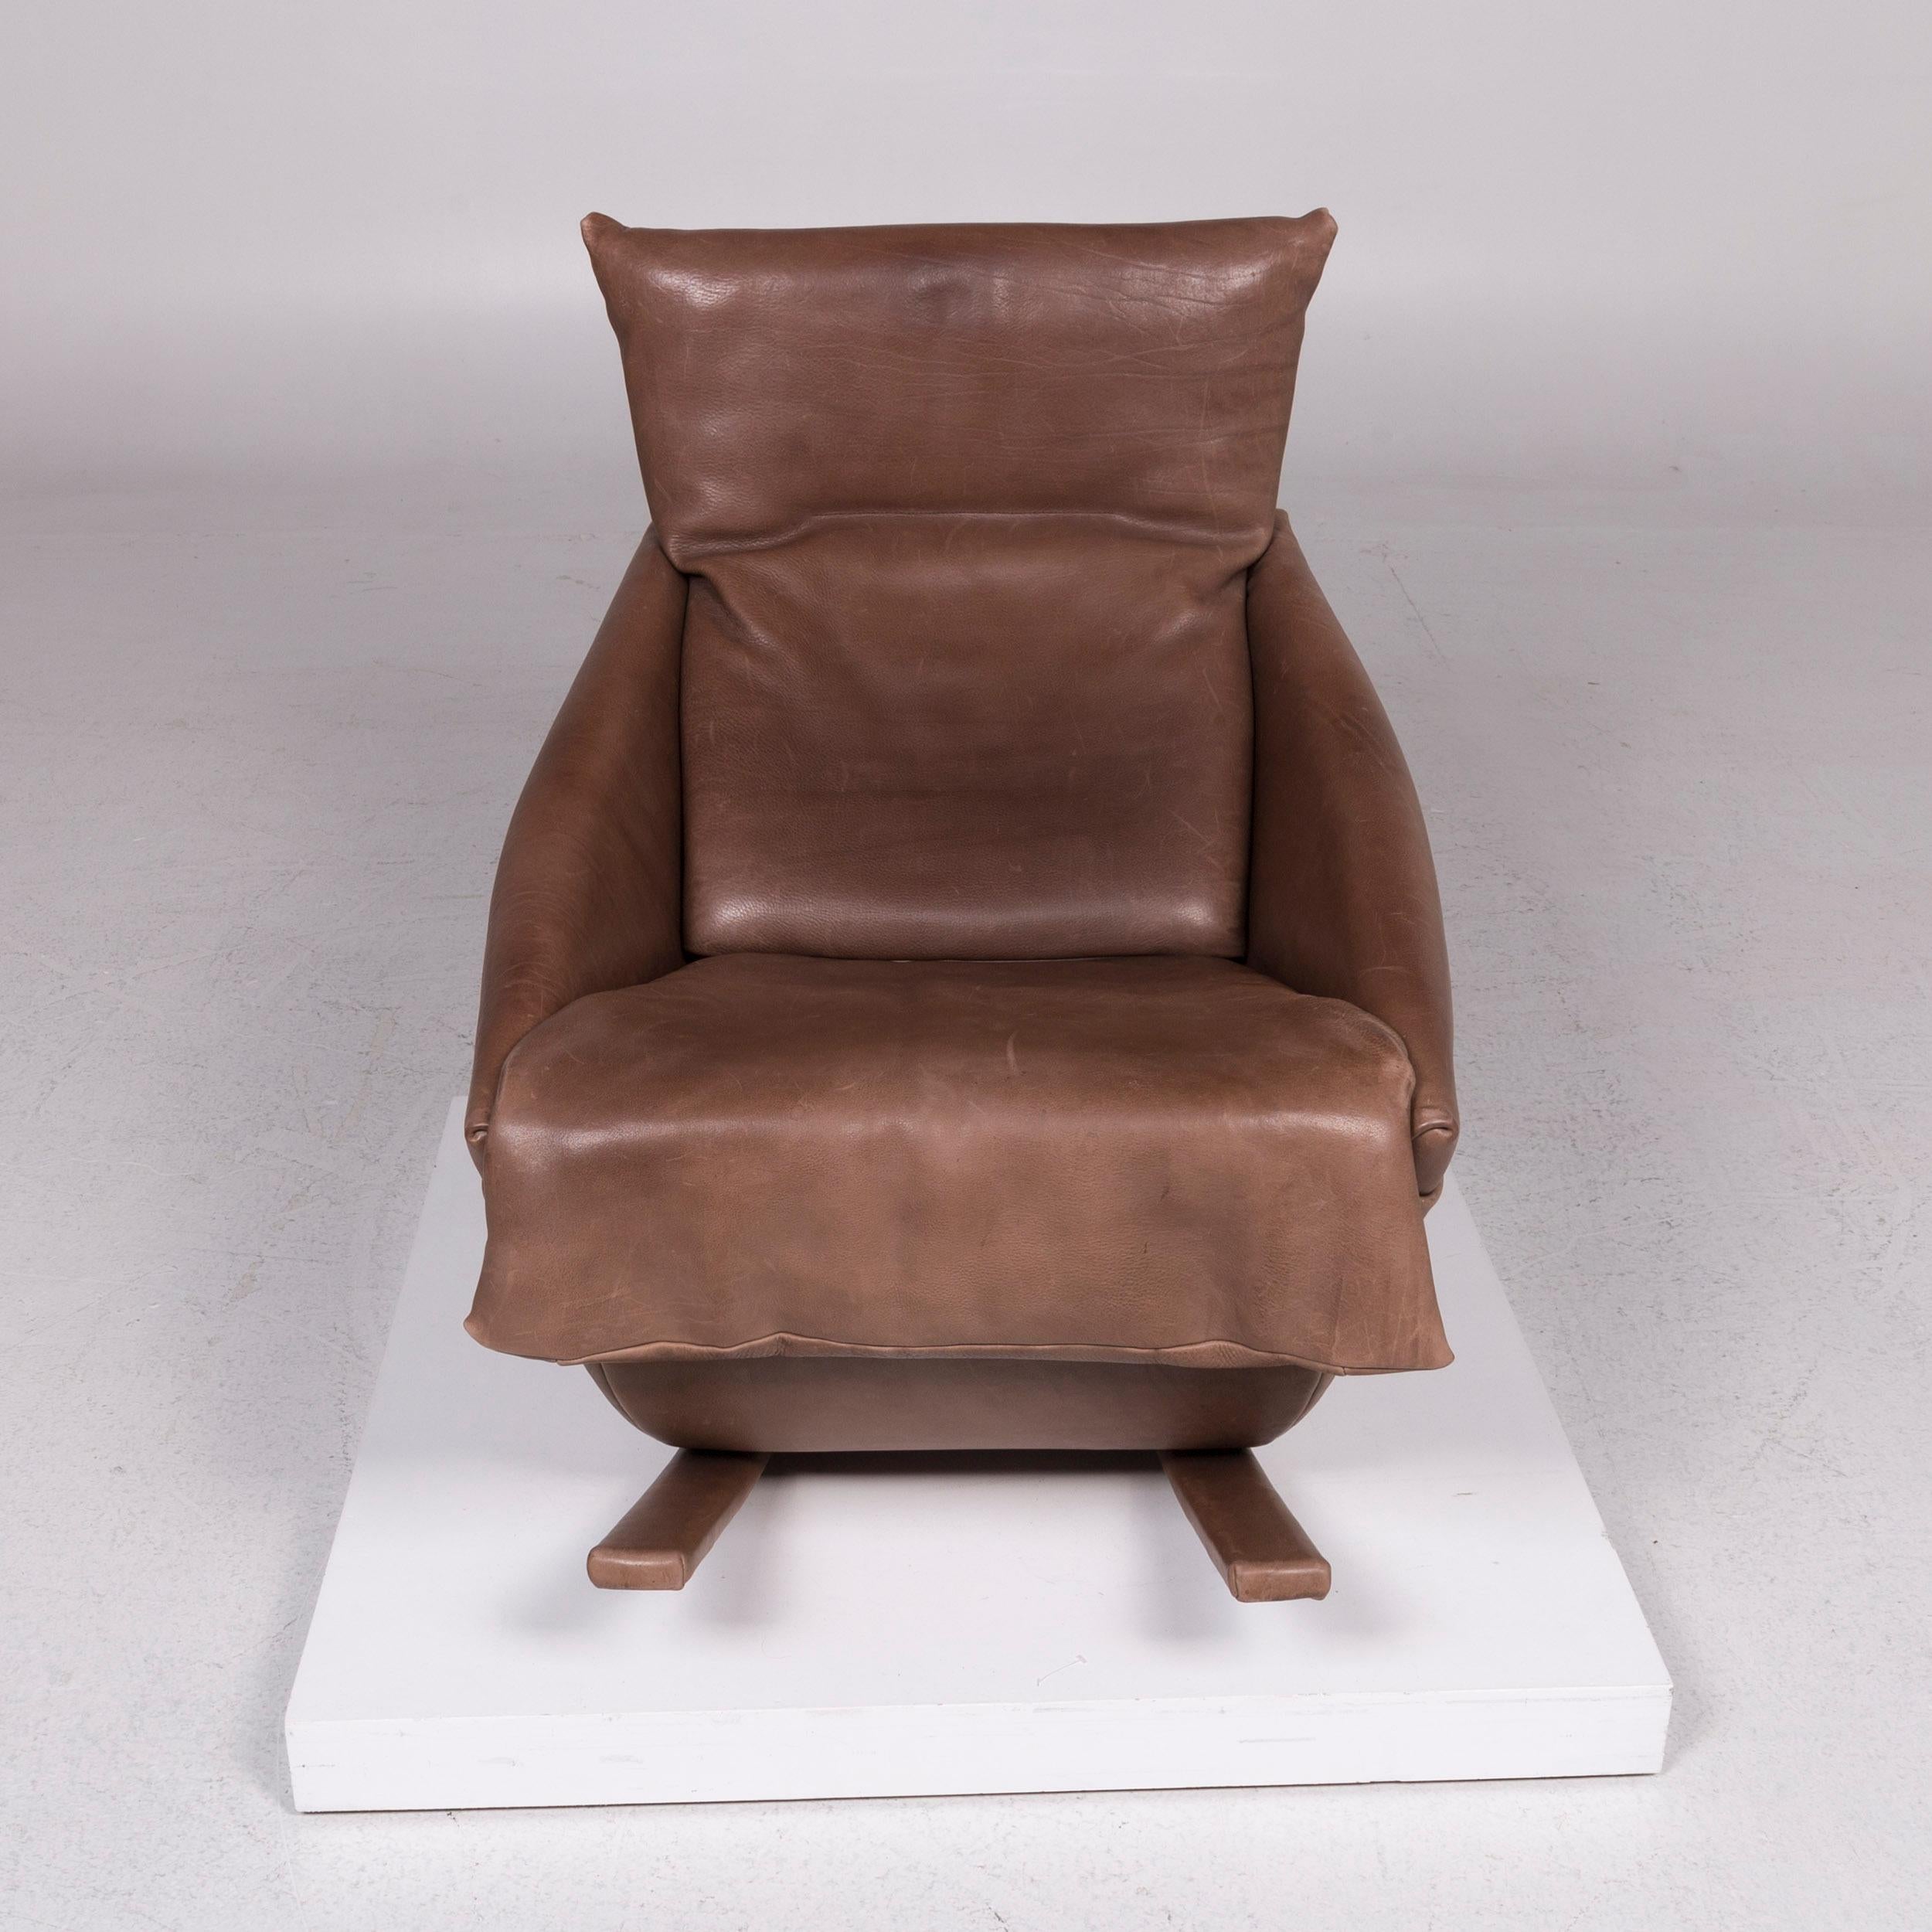 Contemporary De Sede Leather Armchair Brown Rocking Chair